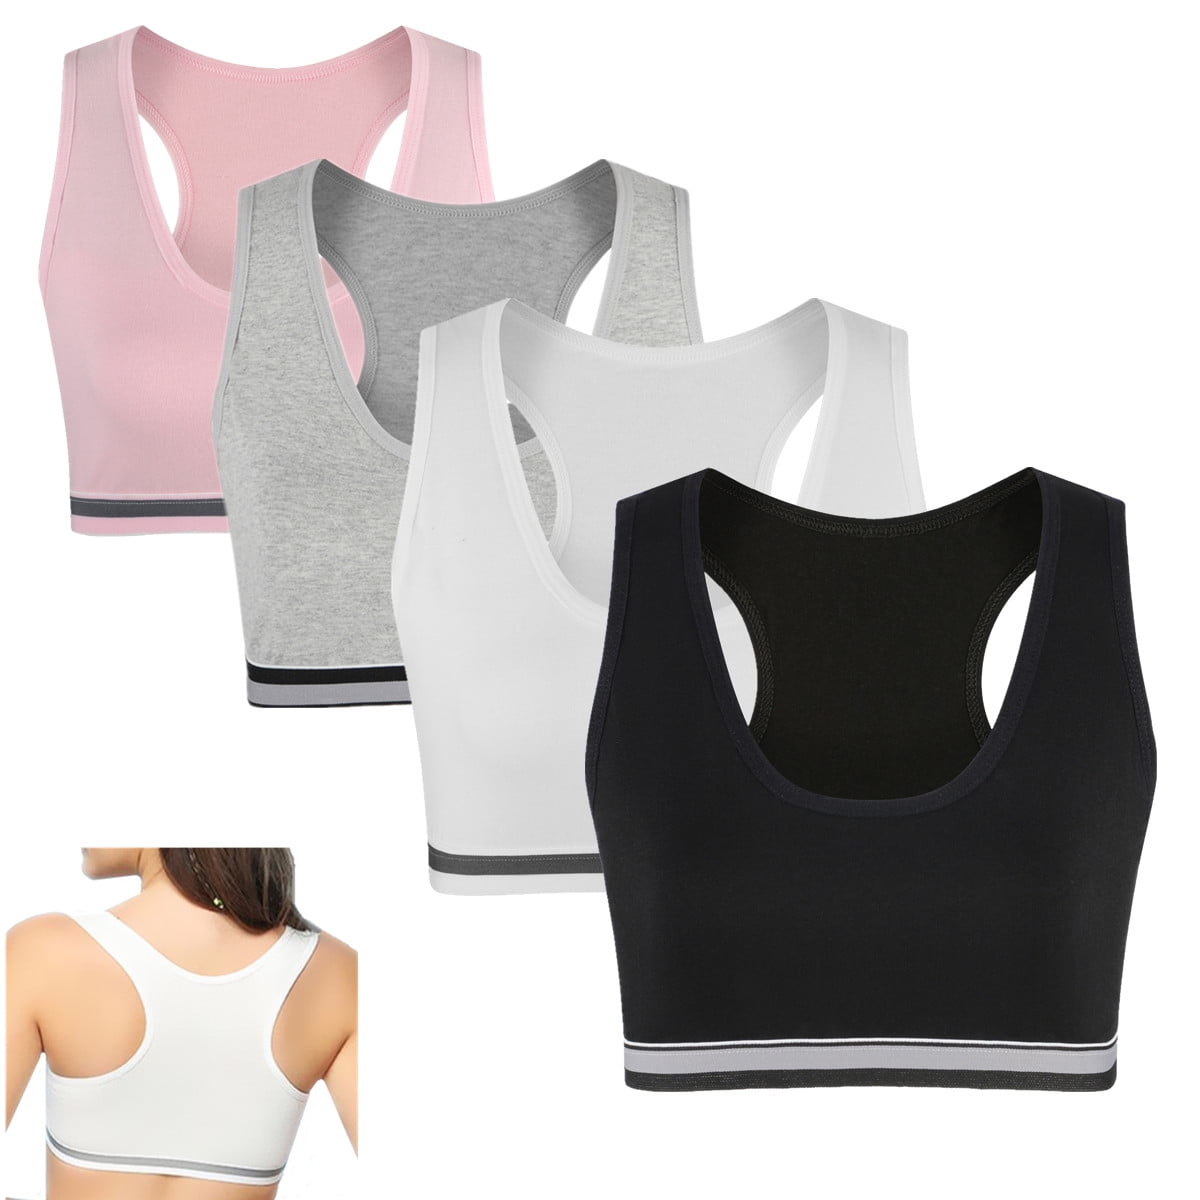 Penkiiy Sports Bras for Women Women's Ruched Sports Bras Padded